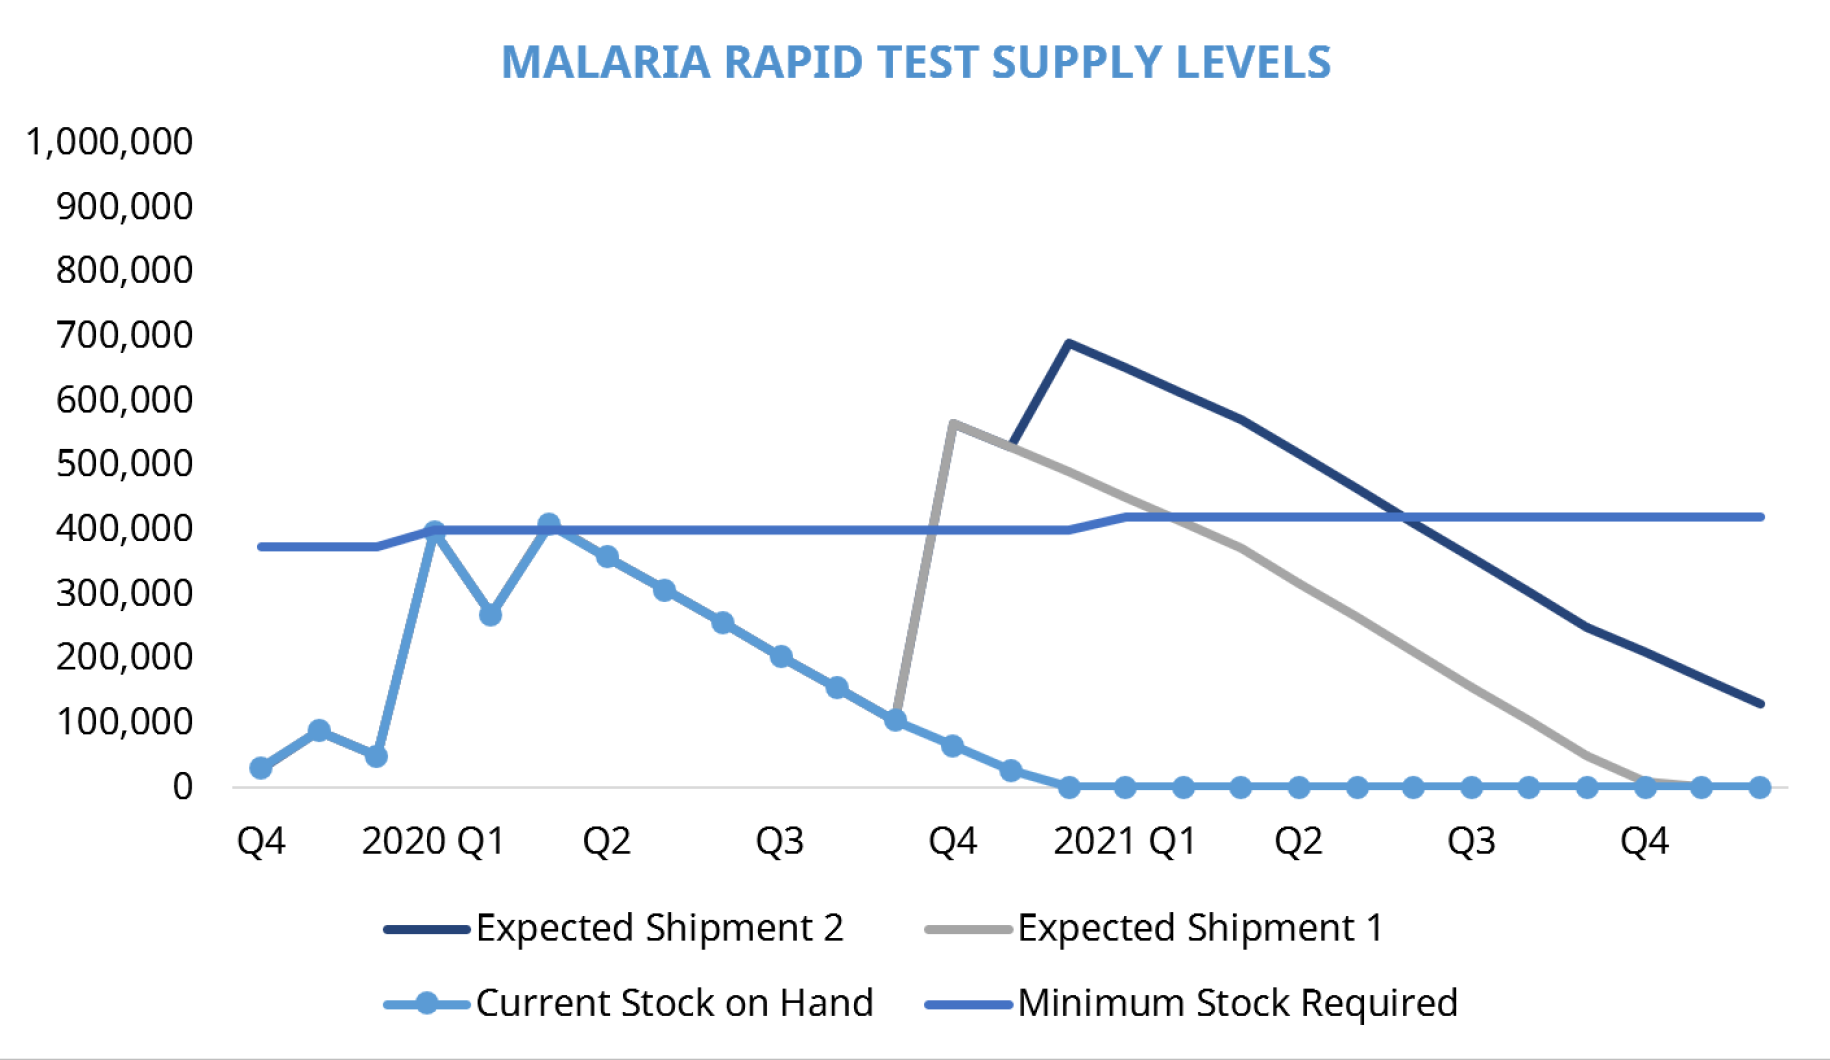 Data on the malaria test supply levels in Lao PDR after the shipment in Q2 of 2020. 